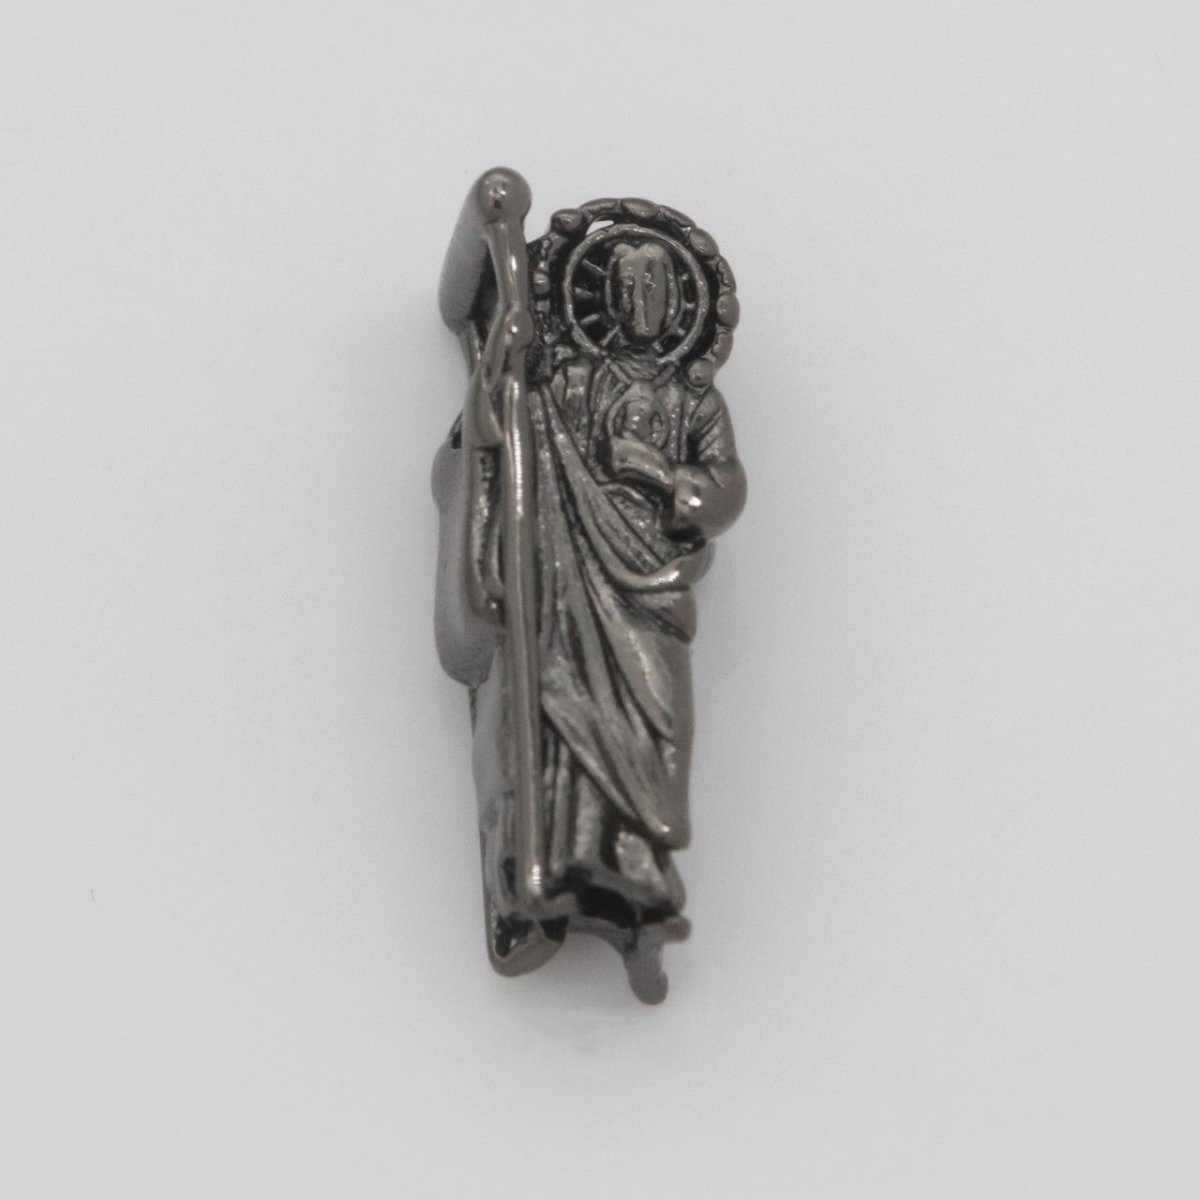 Dainty Gold Saint Jude Bead Spacer St Judas Bead for Bracelet Supply Component Jewelry Making Silver / Black Religious Protection Gift, B-629 B-630 B-631 - DLUXCA